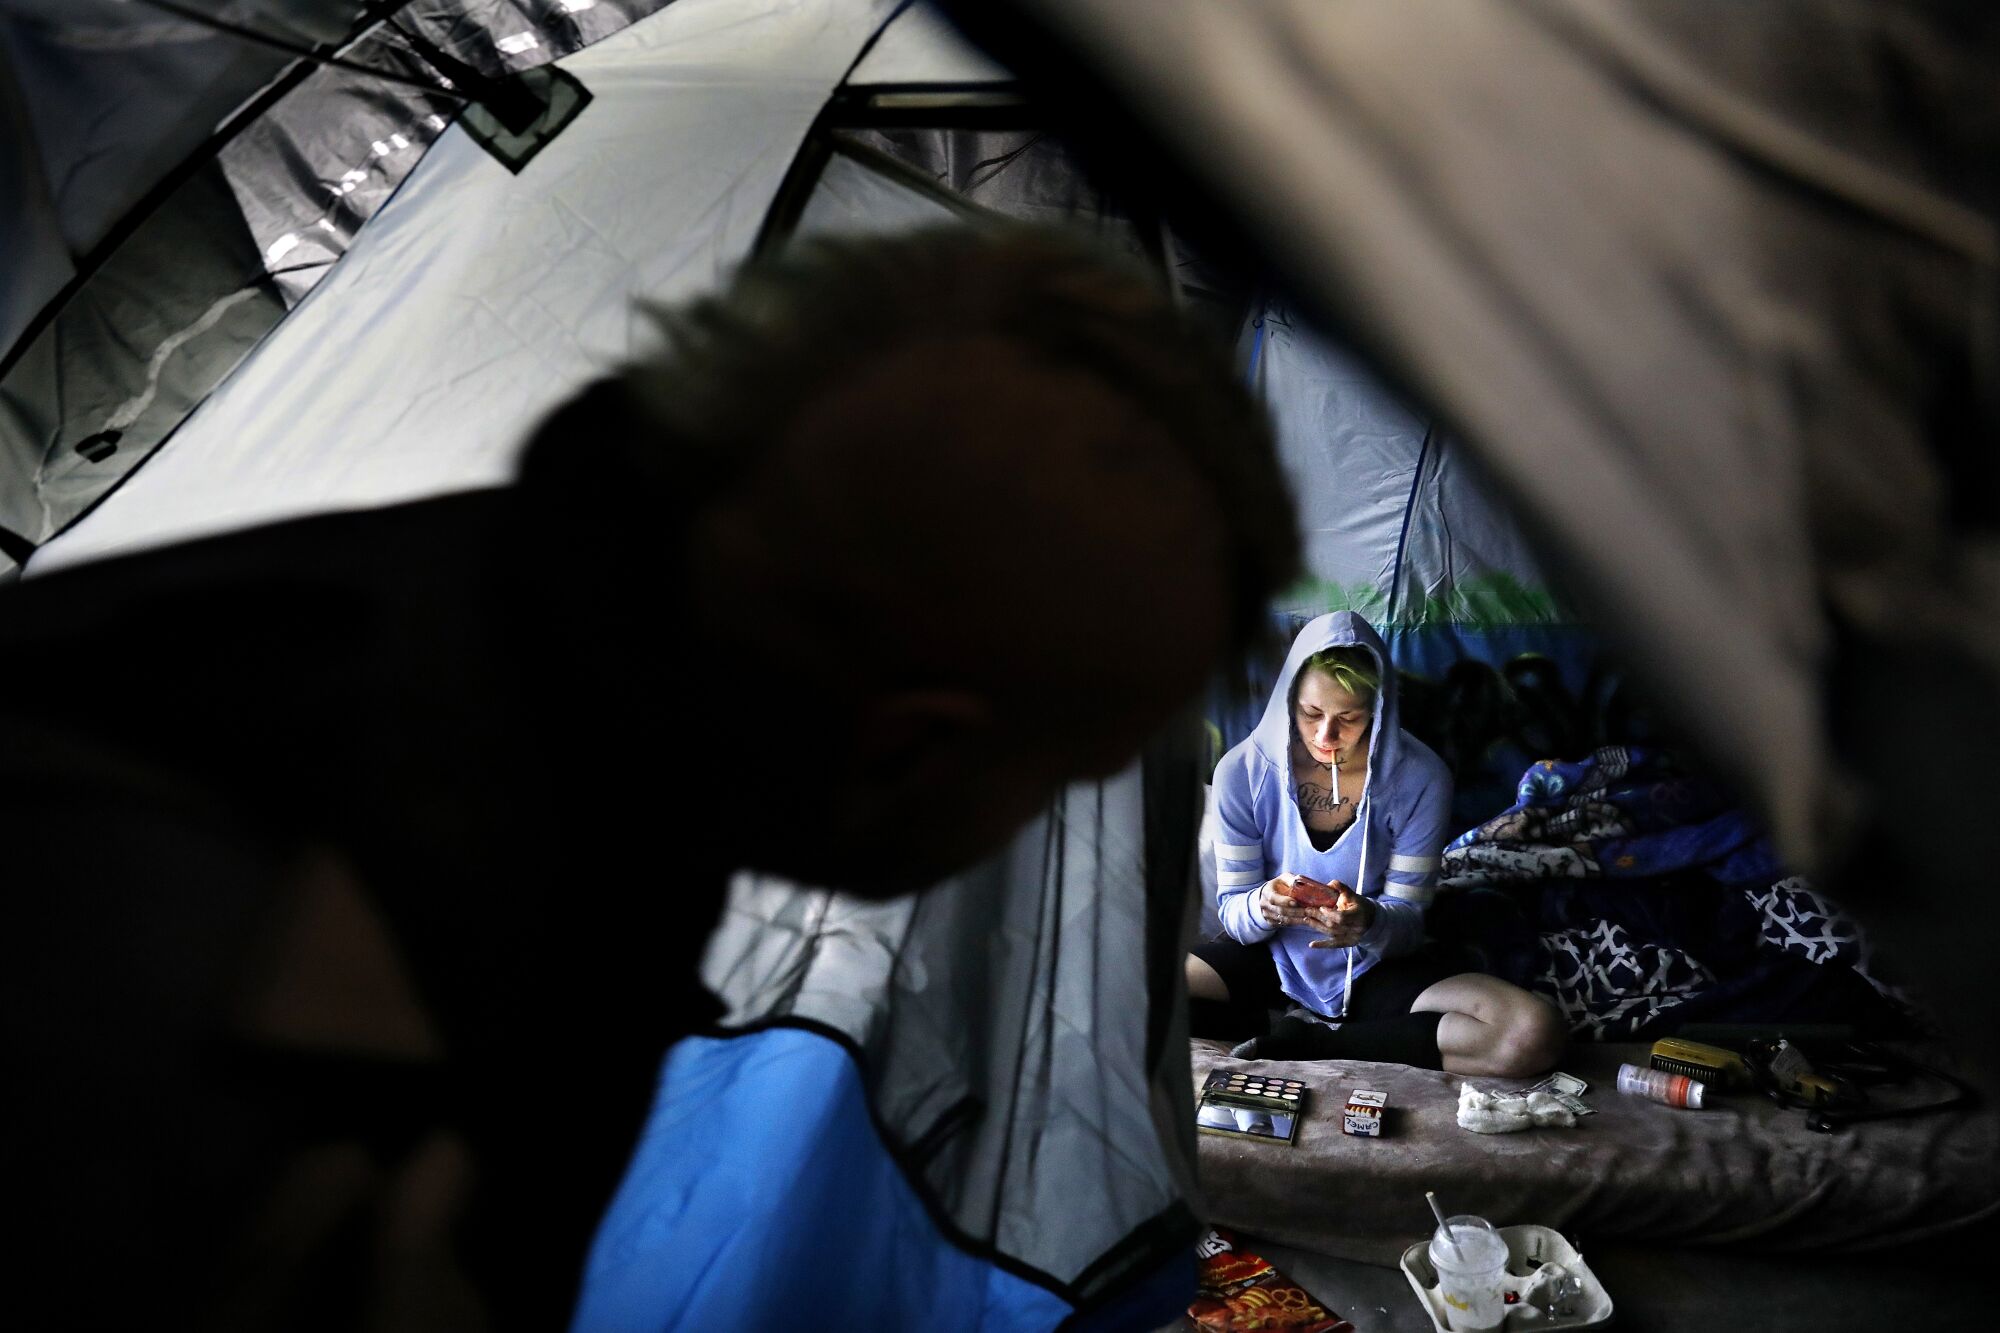 A person in shadow peers into an open tent where a woman in a hoodie smokes and looks at her phone.